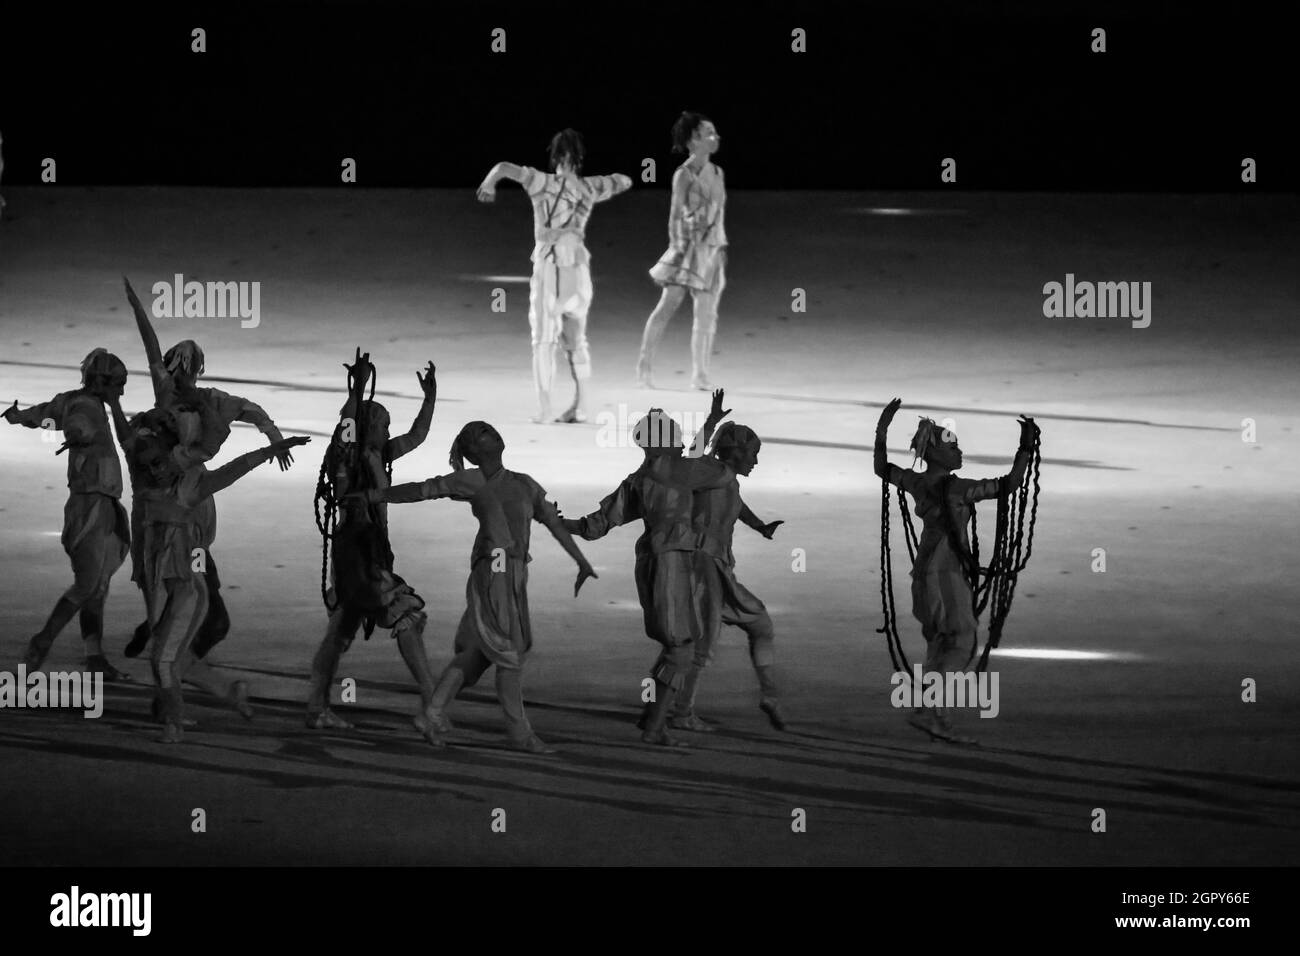 JULY 23rd, 2021 - TOKYO, JAPAN: Apart but not Alone segment of the 2020 Tokyo Olympics Opening Ceremony featuring abstract dancers wearing white outfi Stock Photo